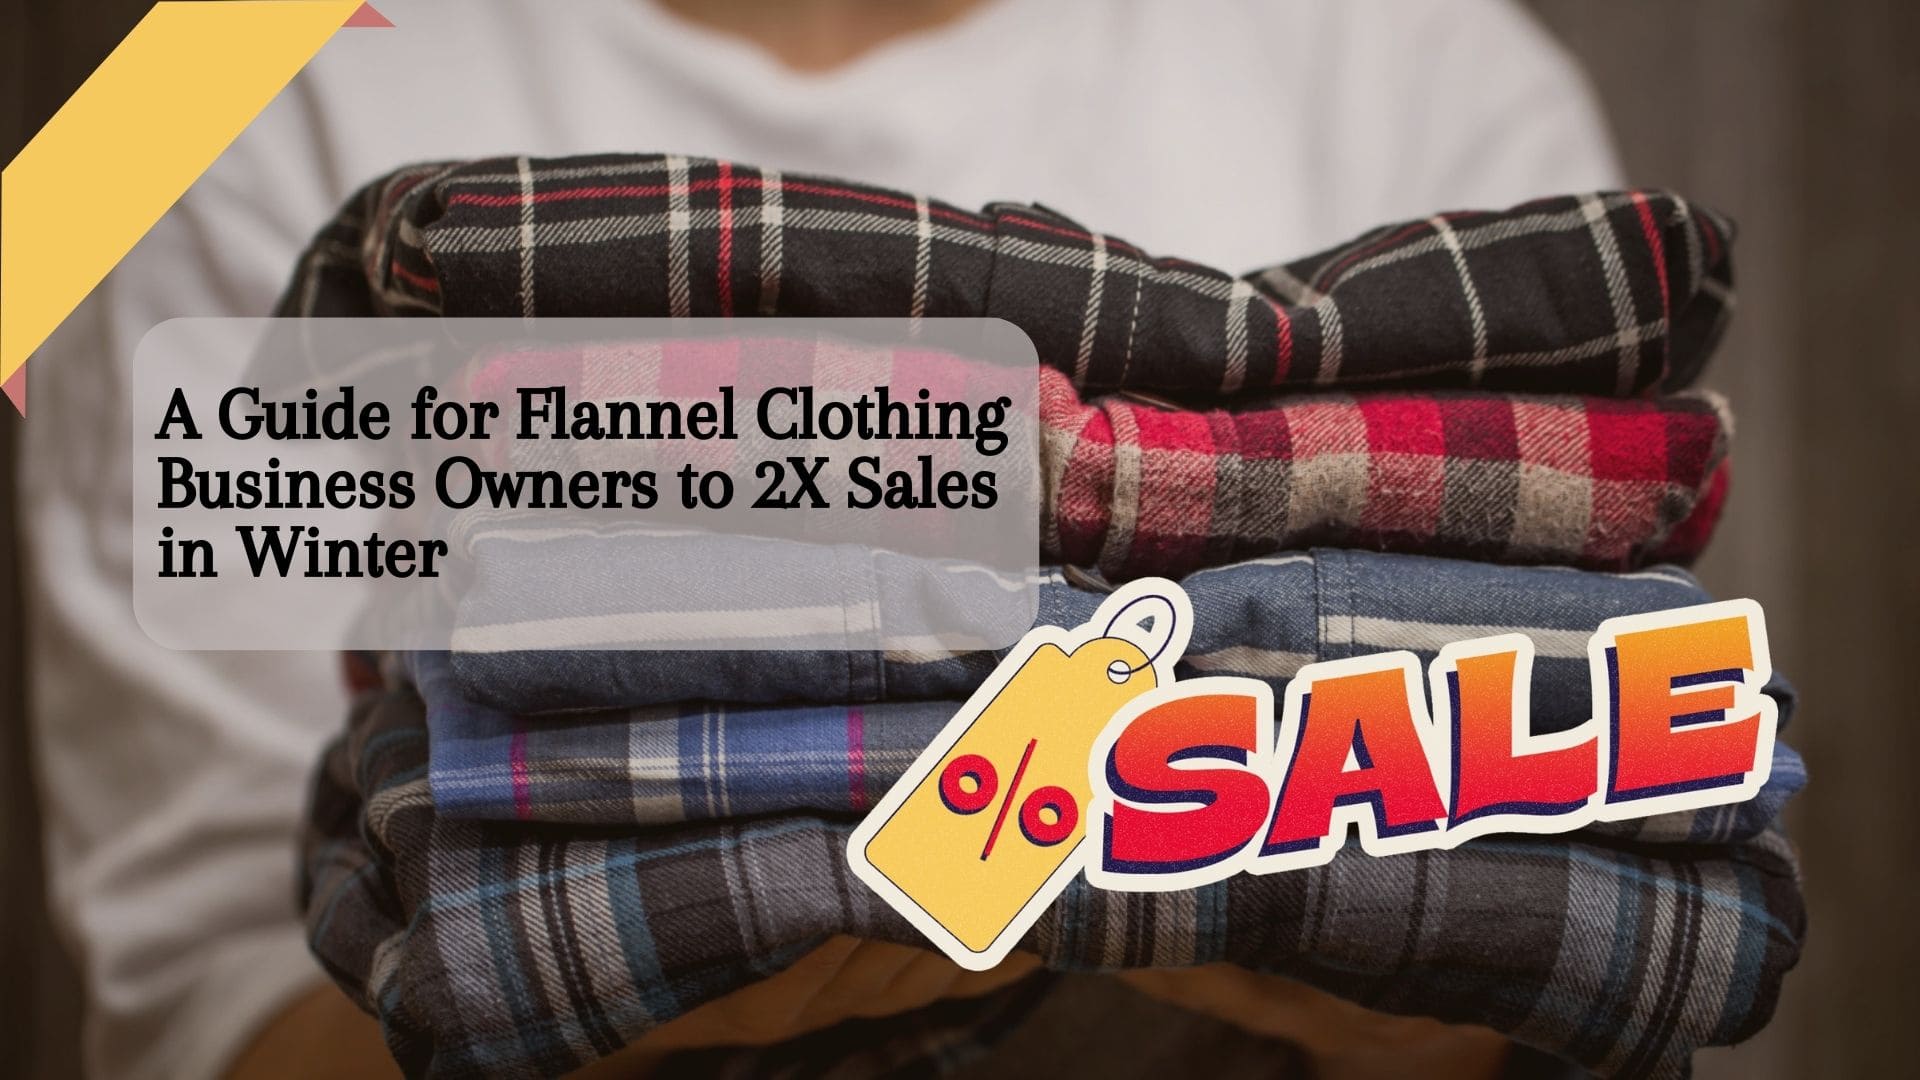 A Guide for Flannel Clothing Business Owners to 2X Sales in Winter